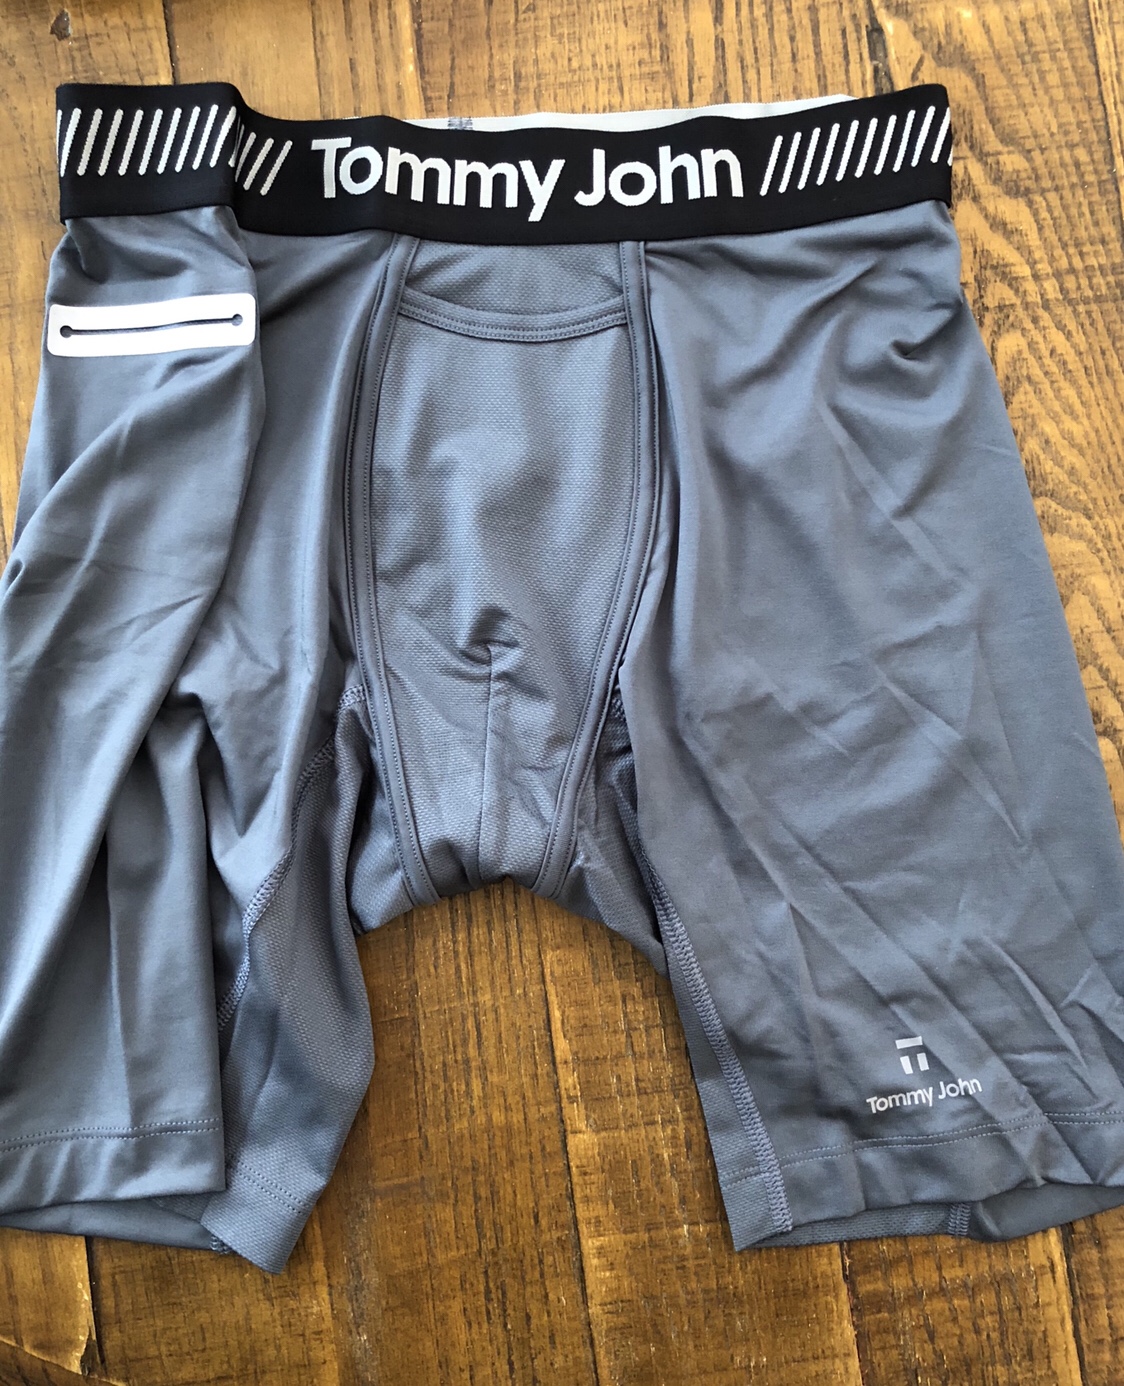 tommy john compression shorts - 58% OFF 